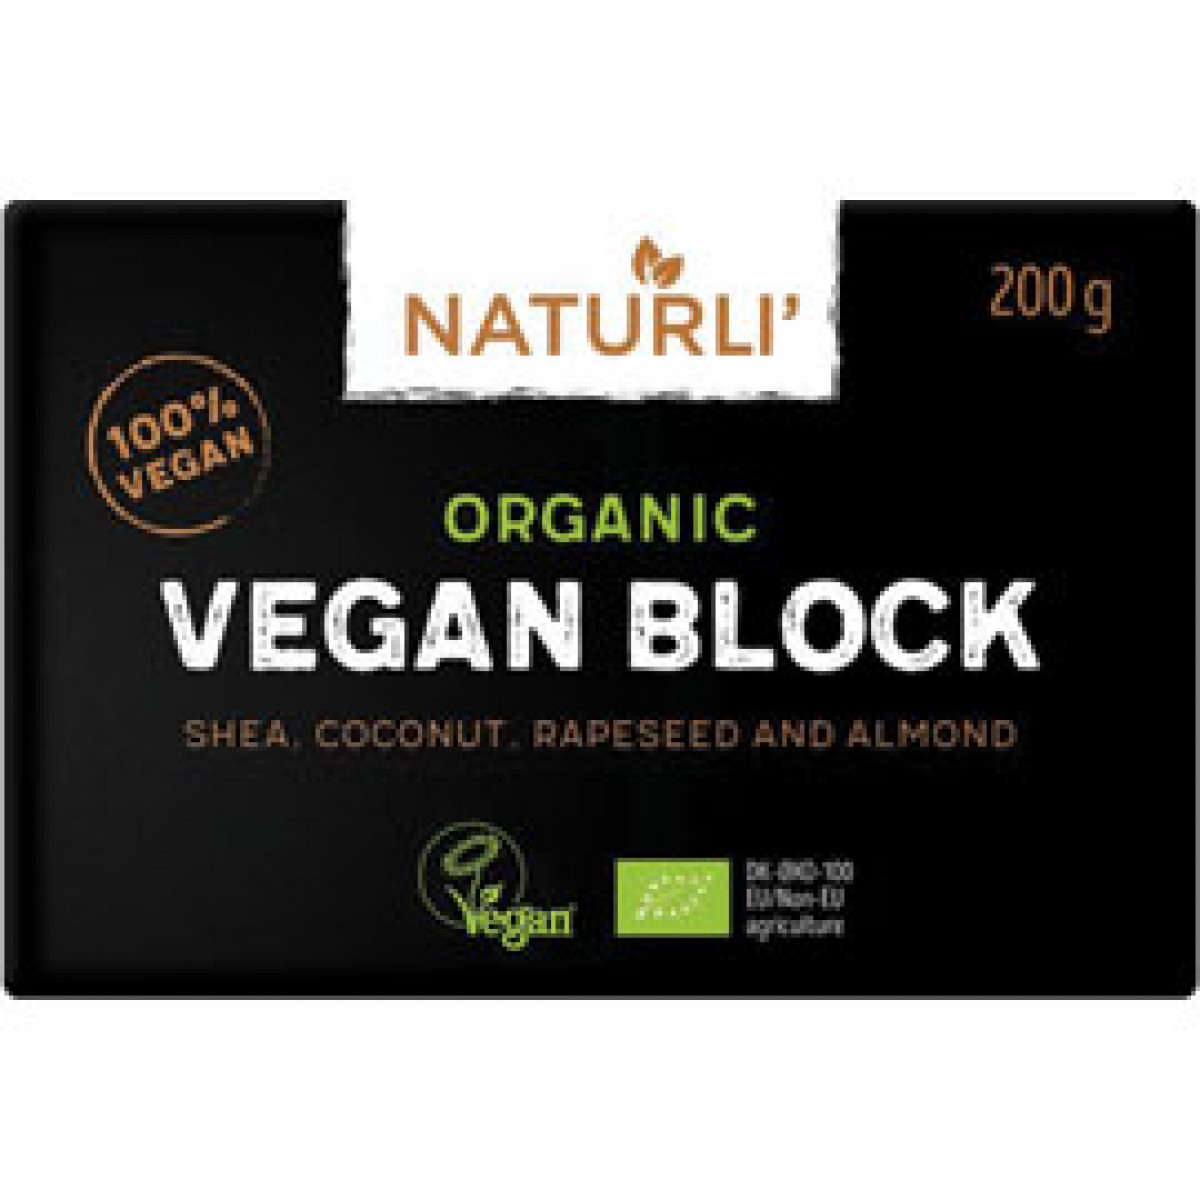 Product picture for Vegan Spread Block